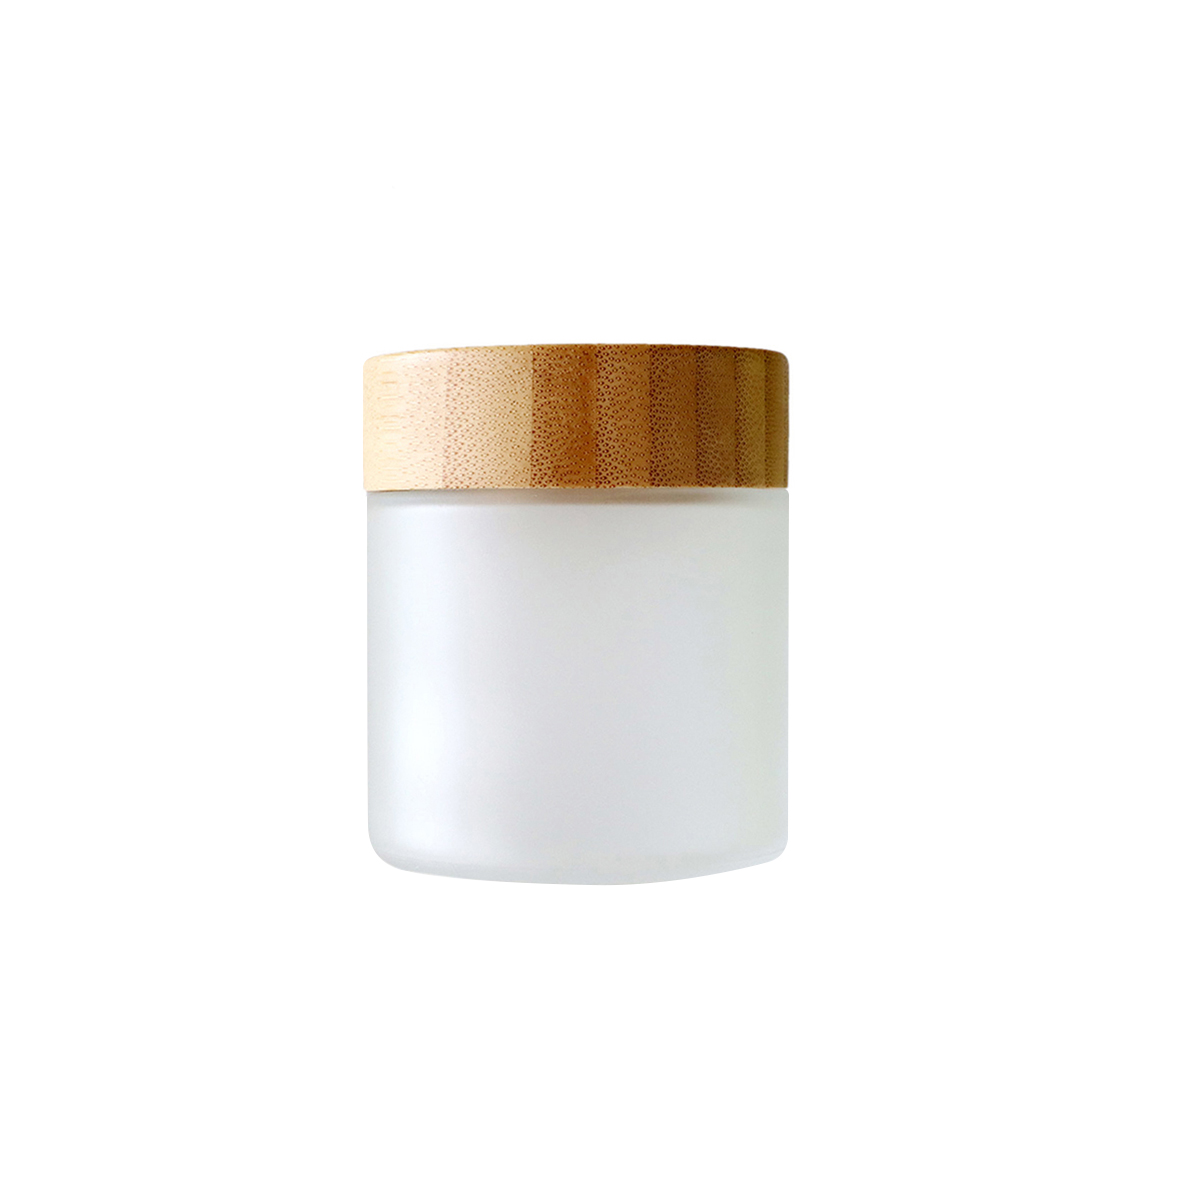 3oz frosted glass cosmetic cream jar with bamboo lid